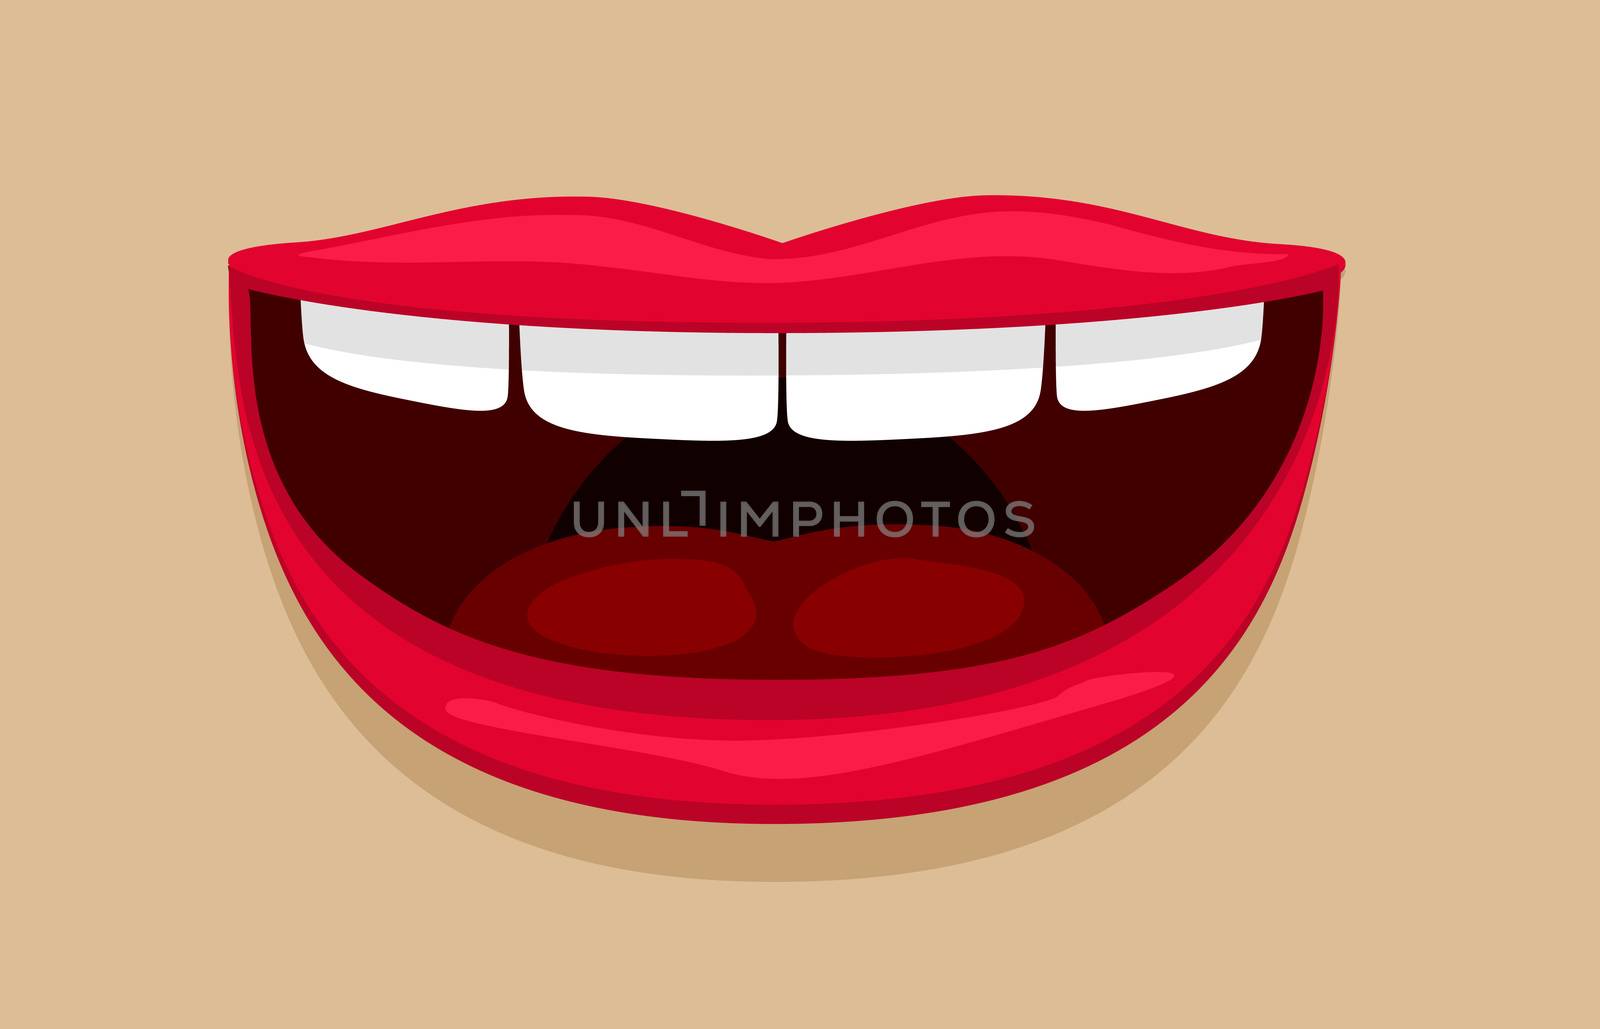 An illustration of a smiling mouth comic style